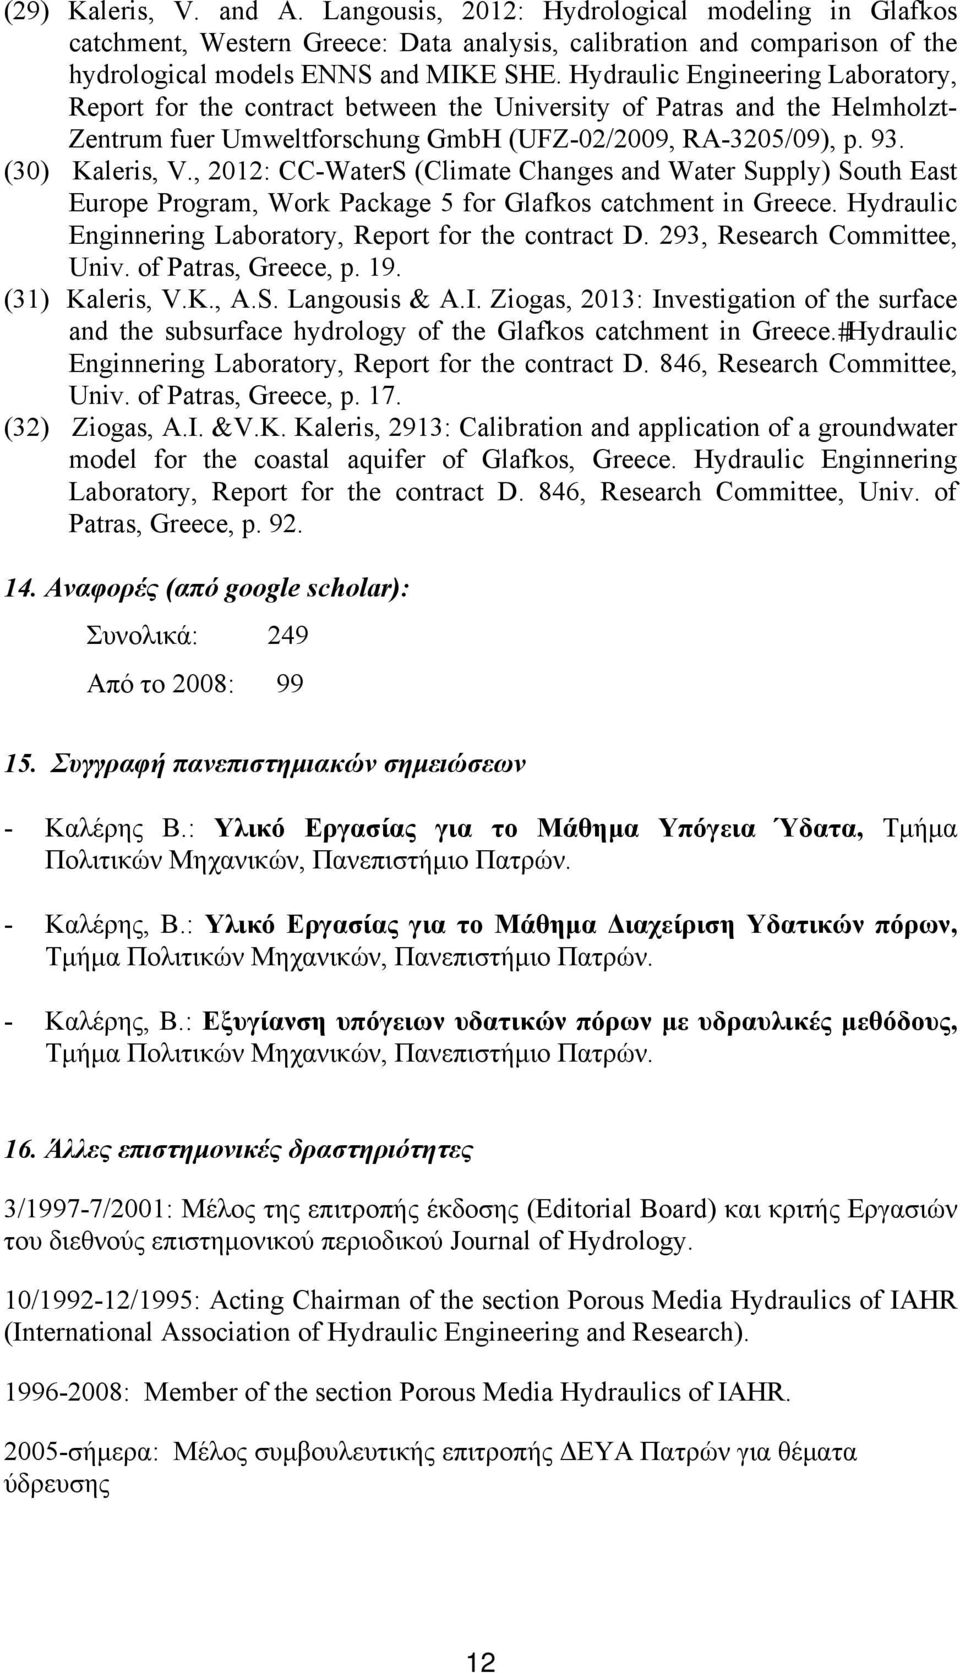 , 2012: CC-WaterS (Climate Changes and Water Supply) South East Europe Program, Work Package 5 for Glafkos catchment in Greece. Hydraulic Enginnering Laboratory, Report for the contract D.